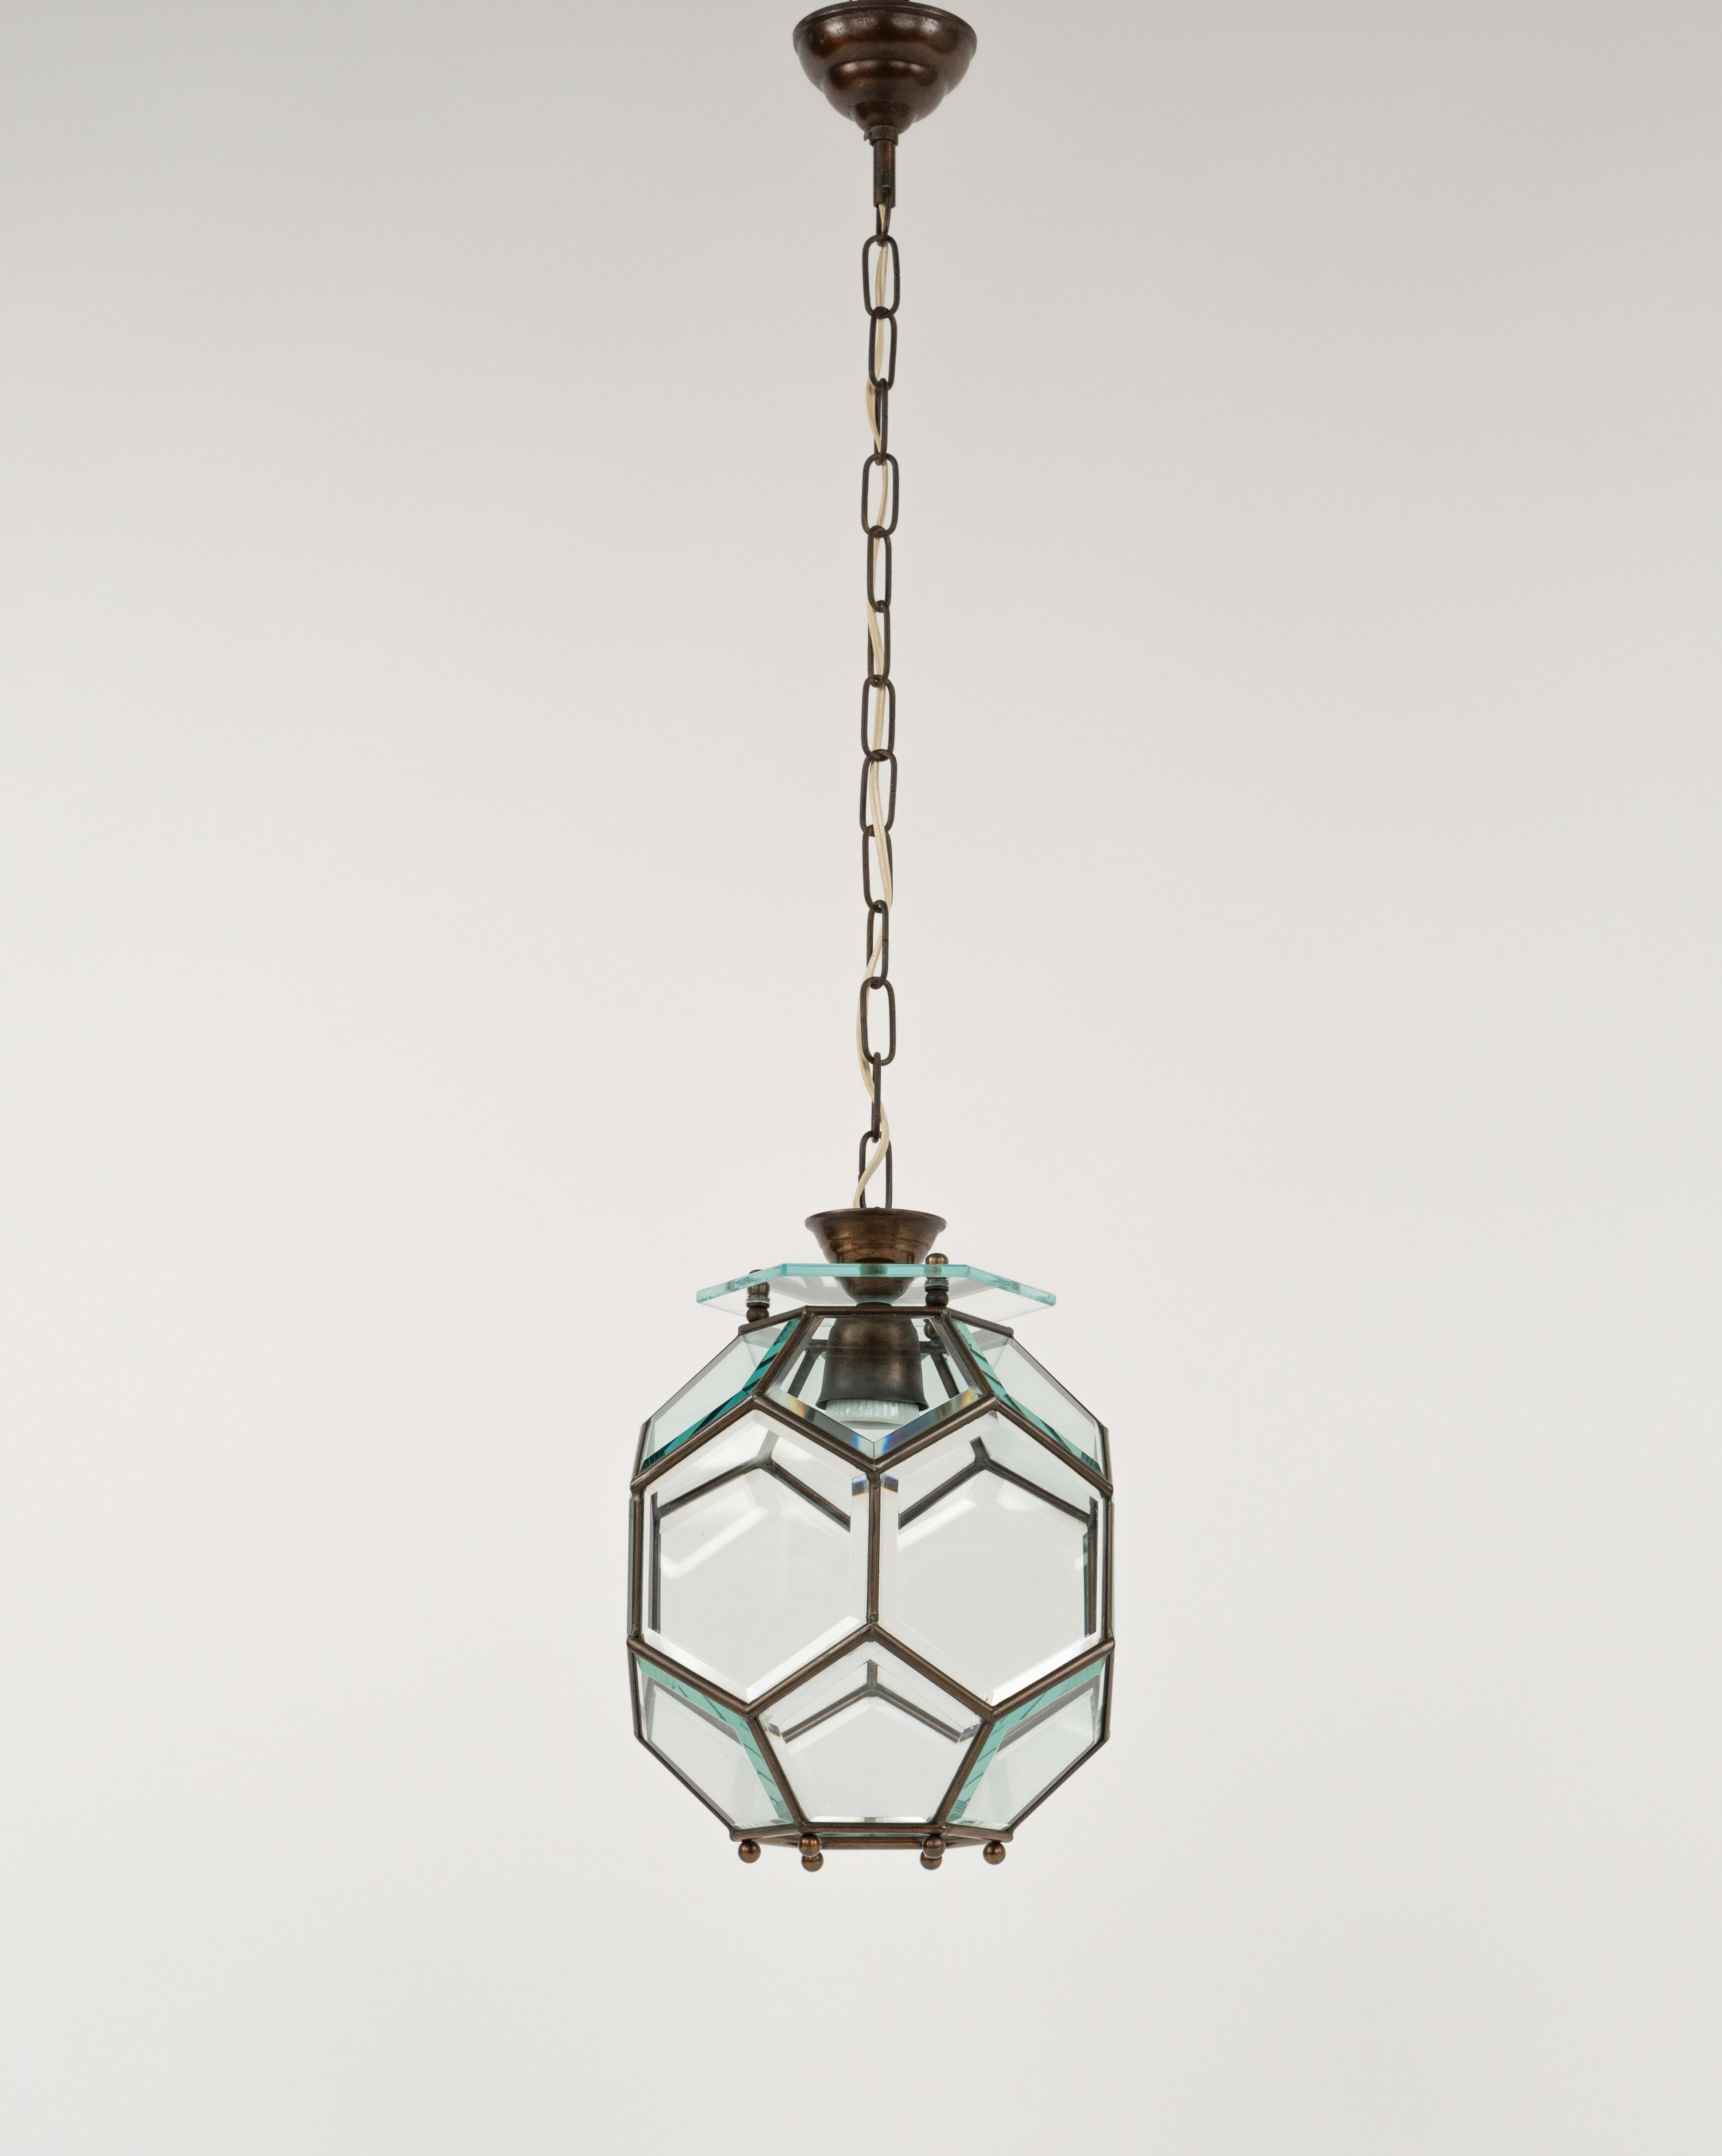 Midcentury Chandelier in Brass and Beveled Glass Adolf Loos Style, Italy 1950s For Sale 4